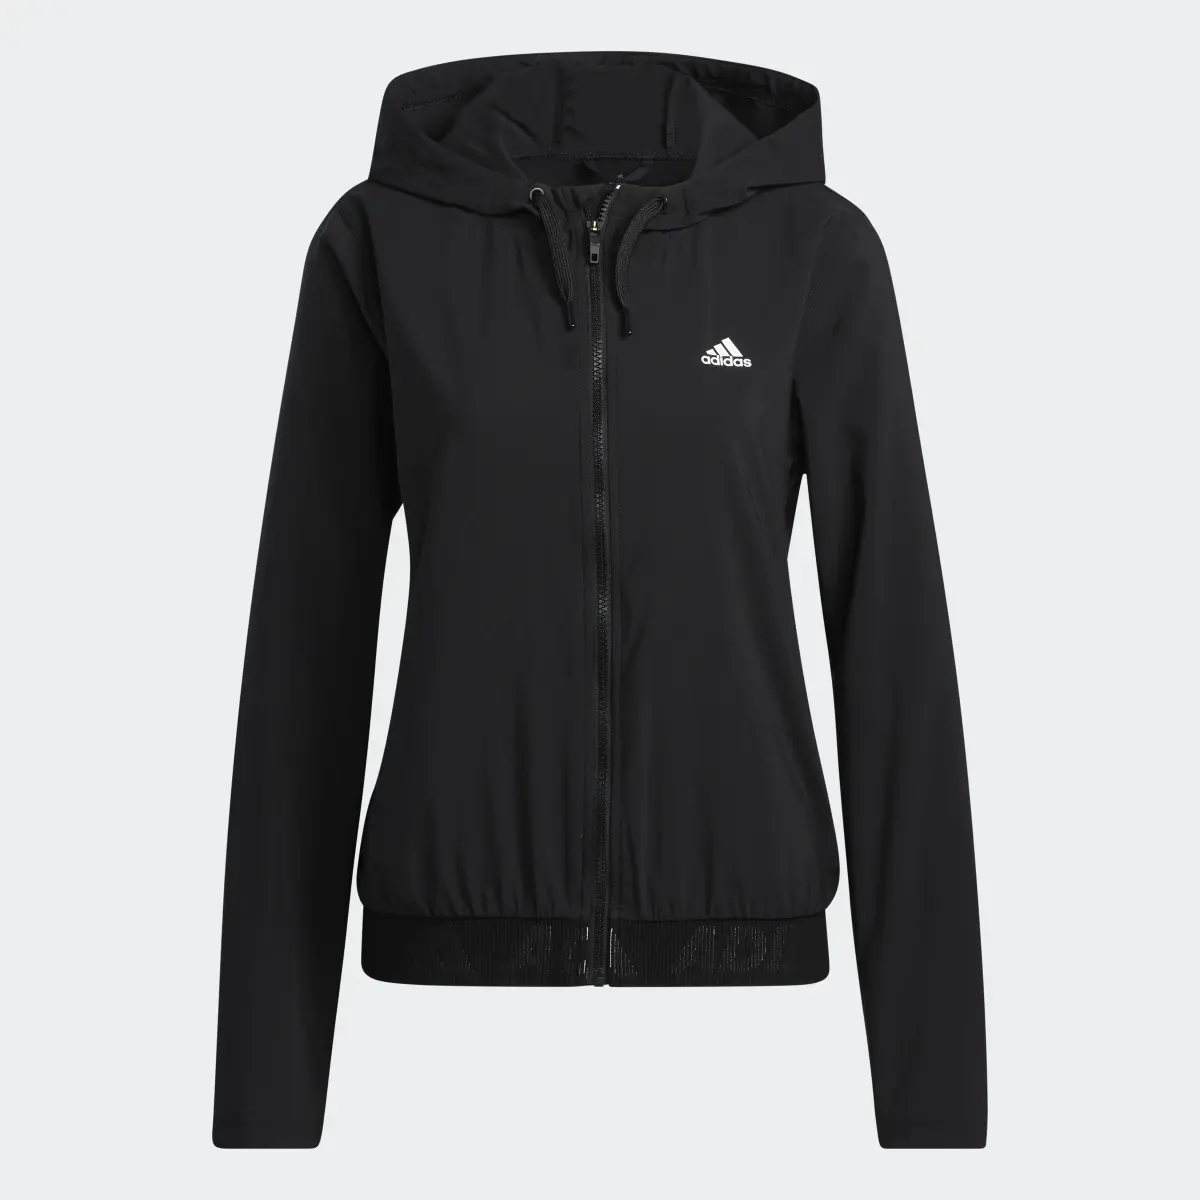 Adidas BRANDED LAYER. 1